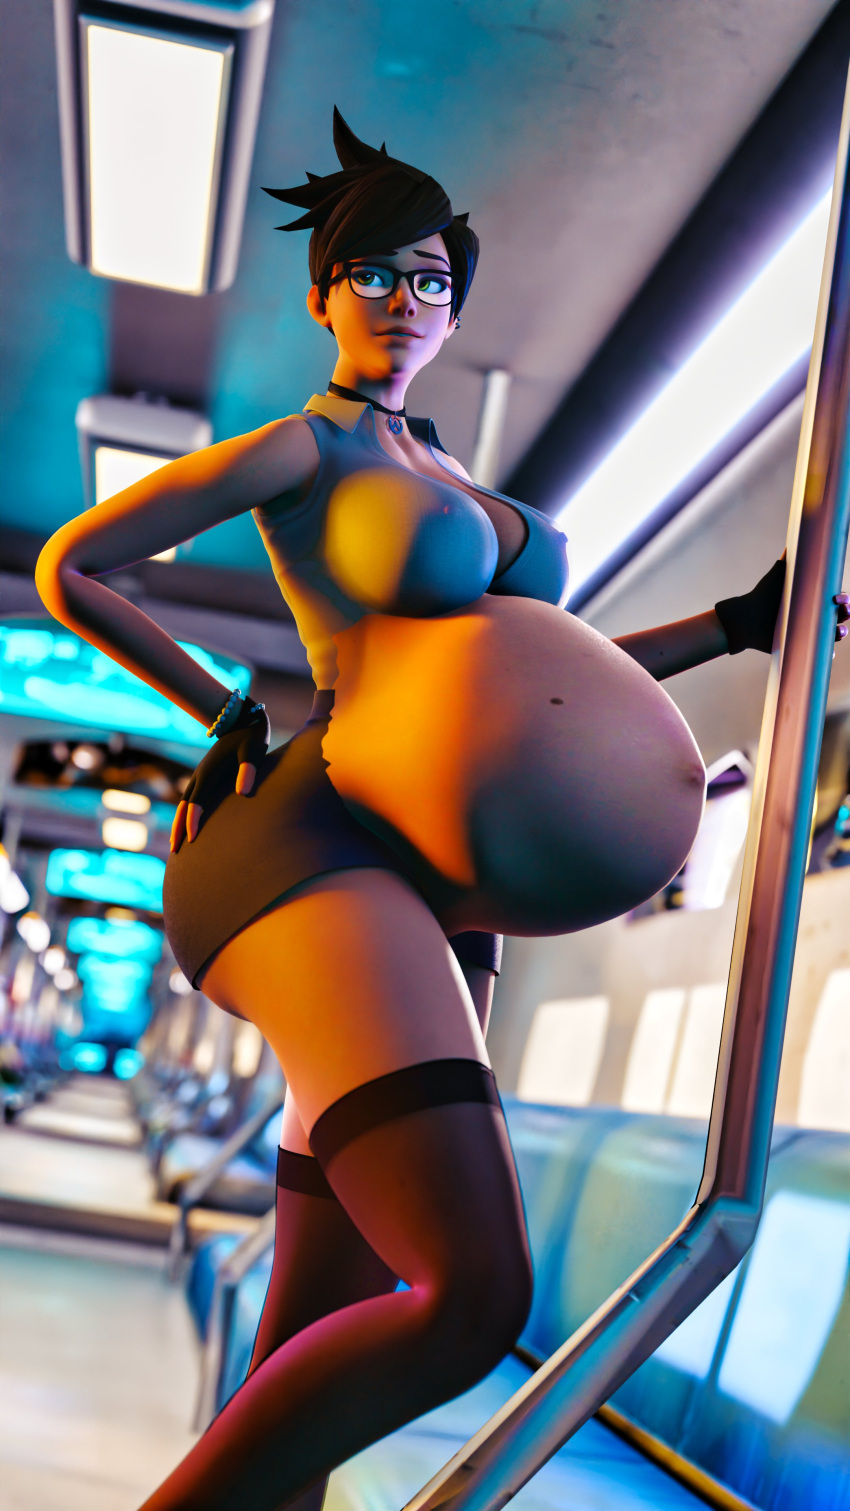 Overwatch Porn - Big Belly, Large Breasts, Clubzenny, Nipple Bulge, Ls,  Breasts, 3d - Valorant Porn Gallery